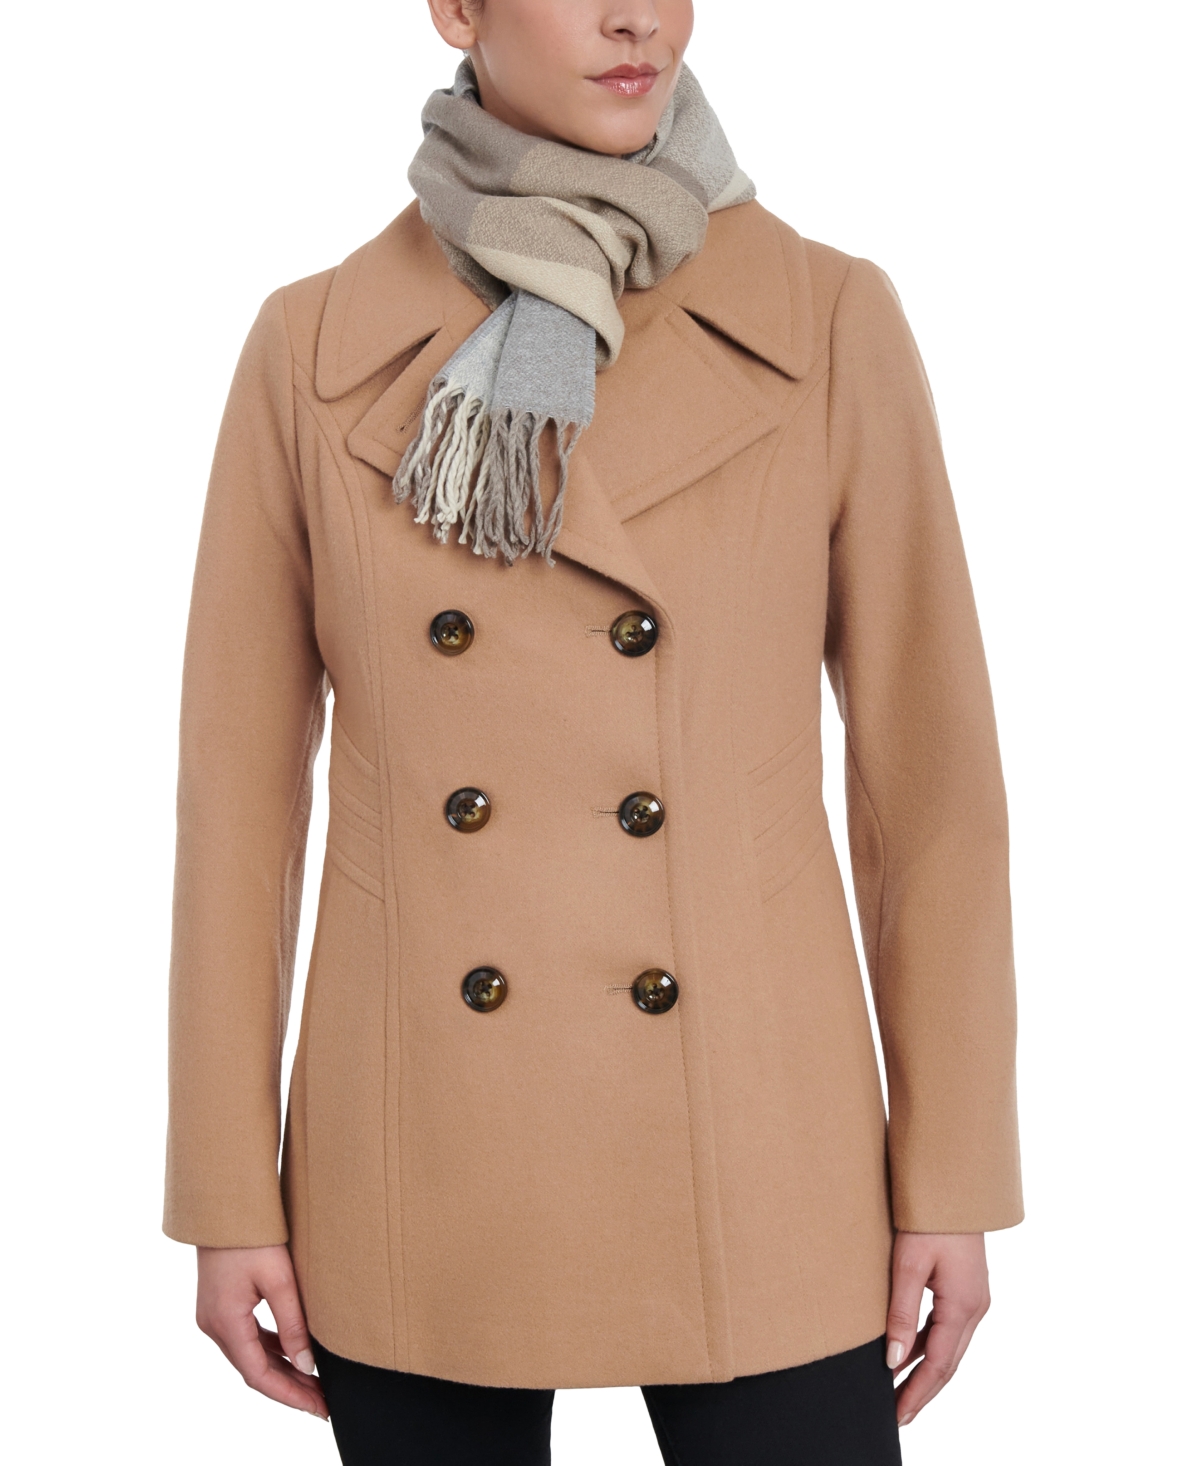 London Fog Women's Double-breasted Wool Blend Peacoat & Plaid Scarf In Camel